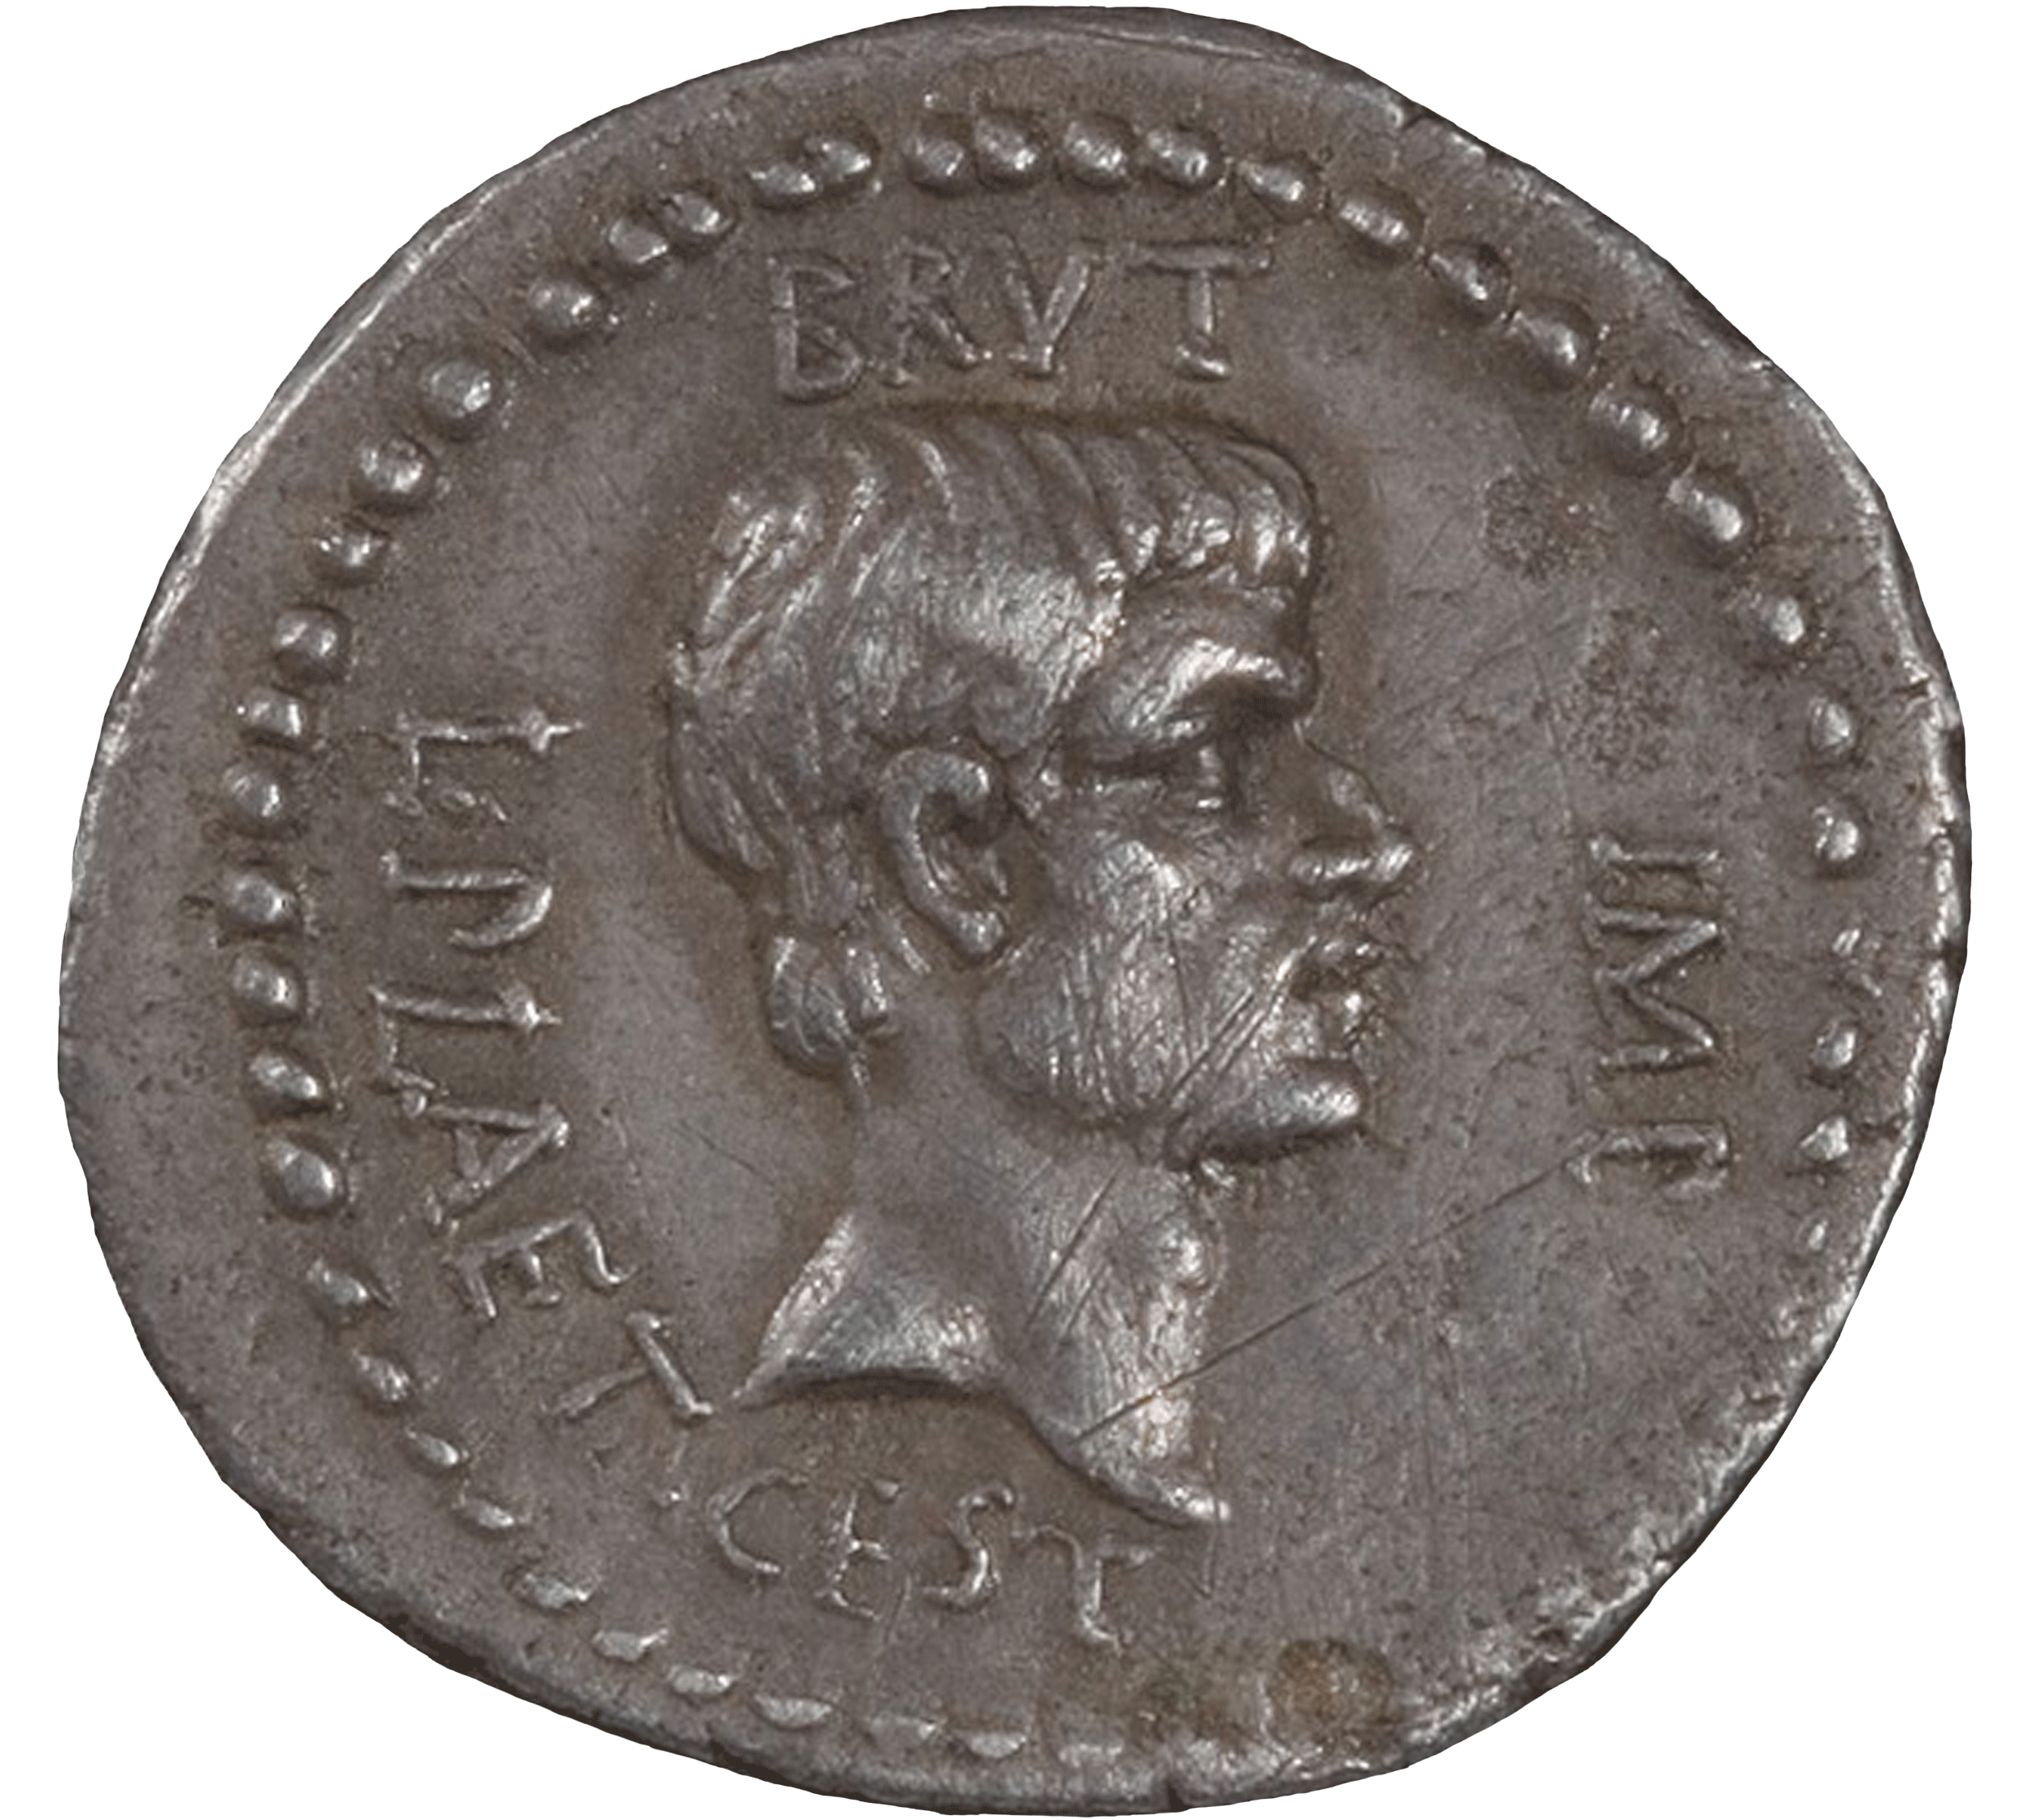 Coin with head in profile